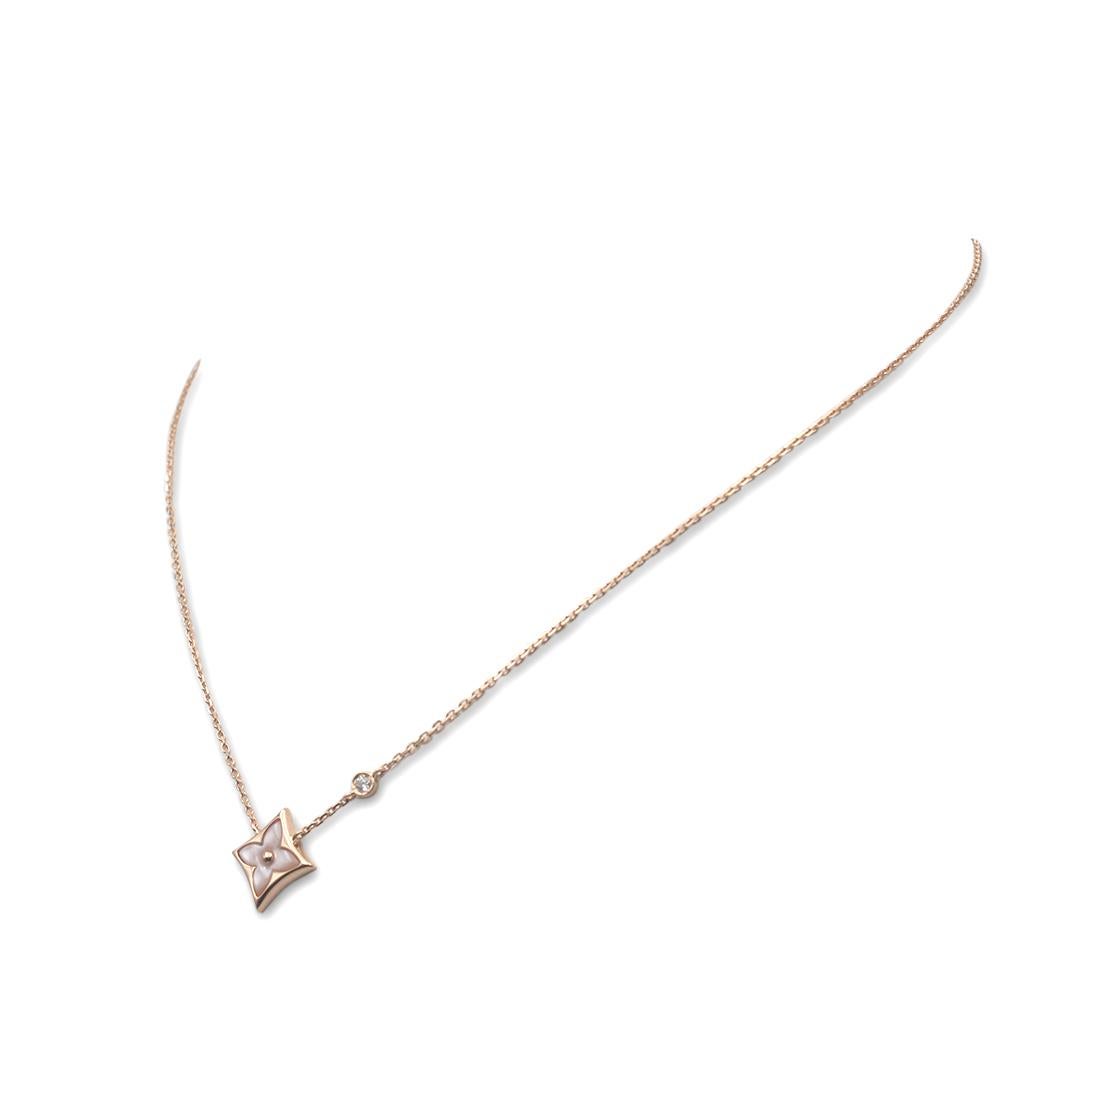 Authentic Louis Vuitton 'Color Blossom BB Star' pendant necklace crafted in 18 karat rose gold. The pendant is inspired by flower blossoms and its petals are set with mother-of-pearl. The delicate chain necklace also features a station with 1 round